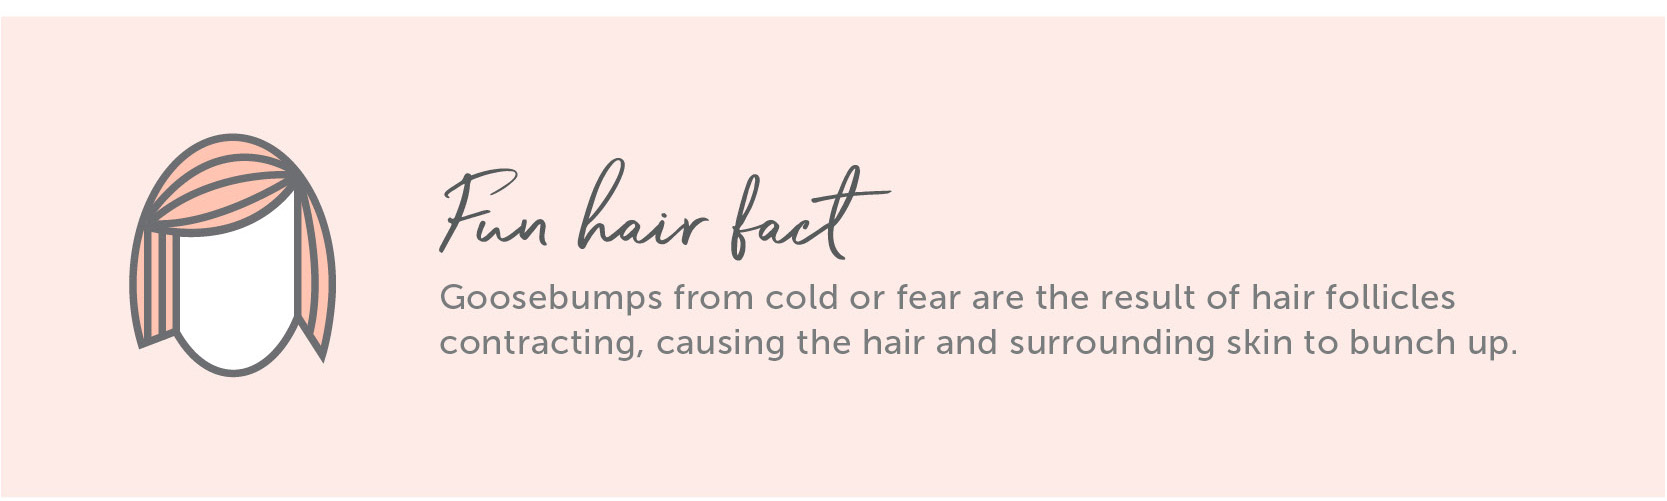 Fun Hair Fact - Goosebumps from cold are the result of hair follicles contracting, causing the surrounding skin to bunch up.